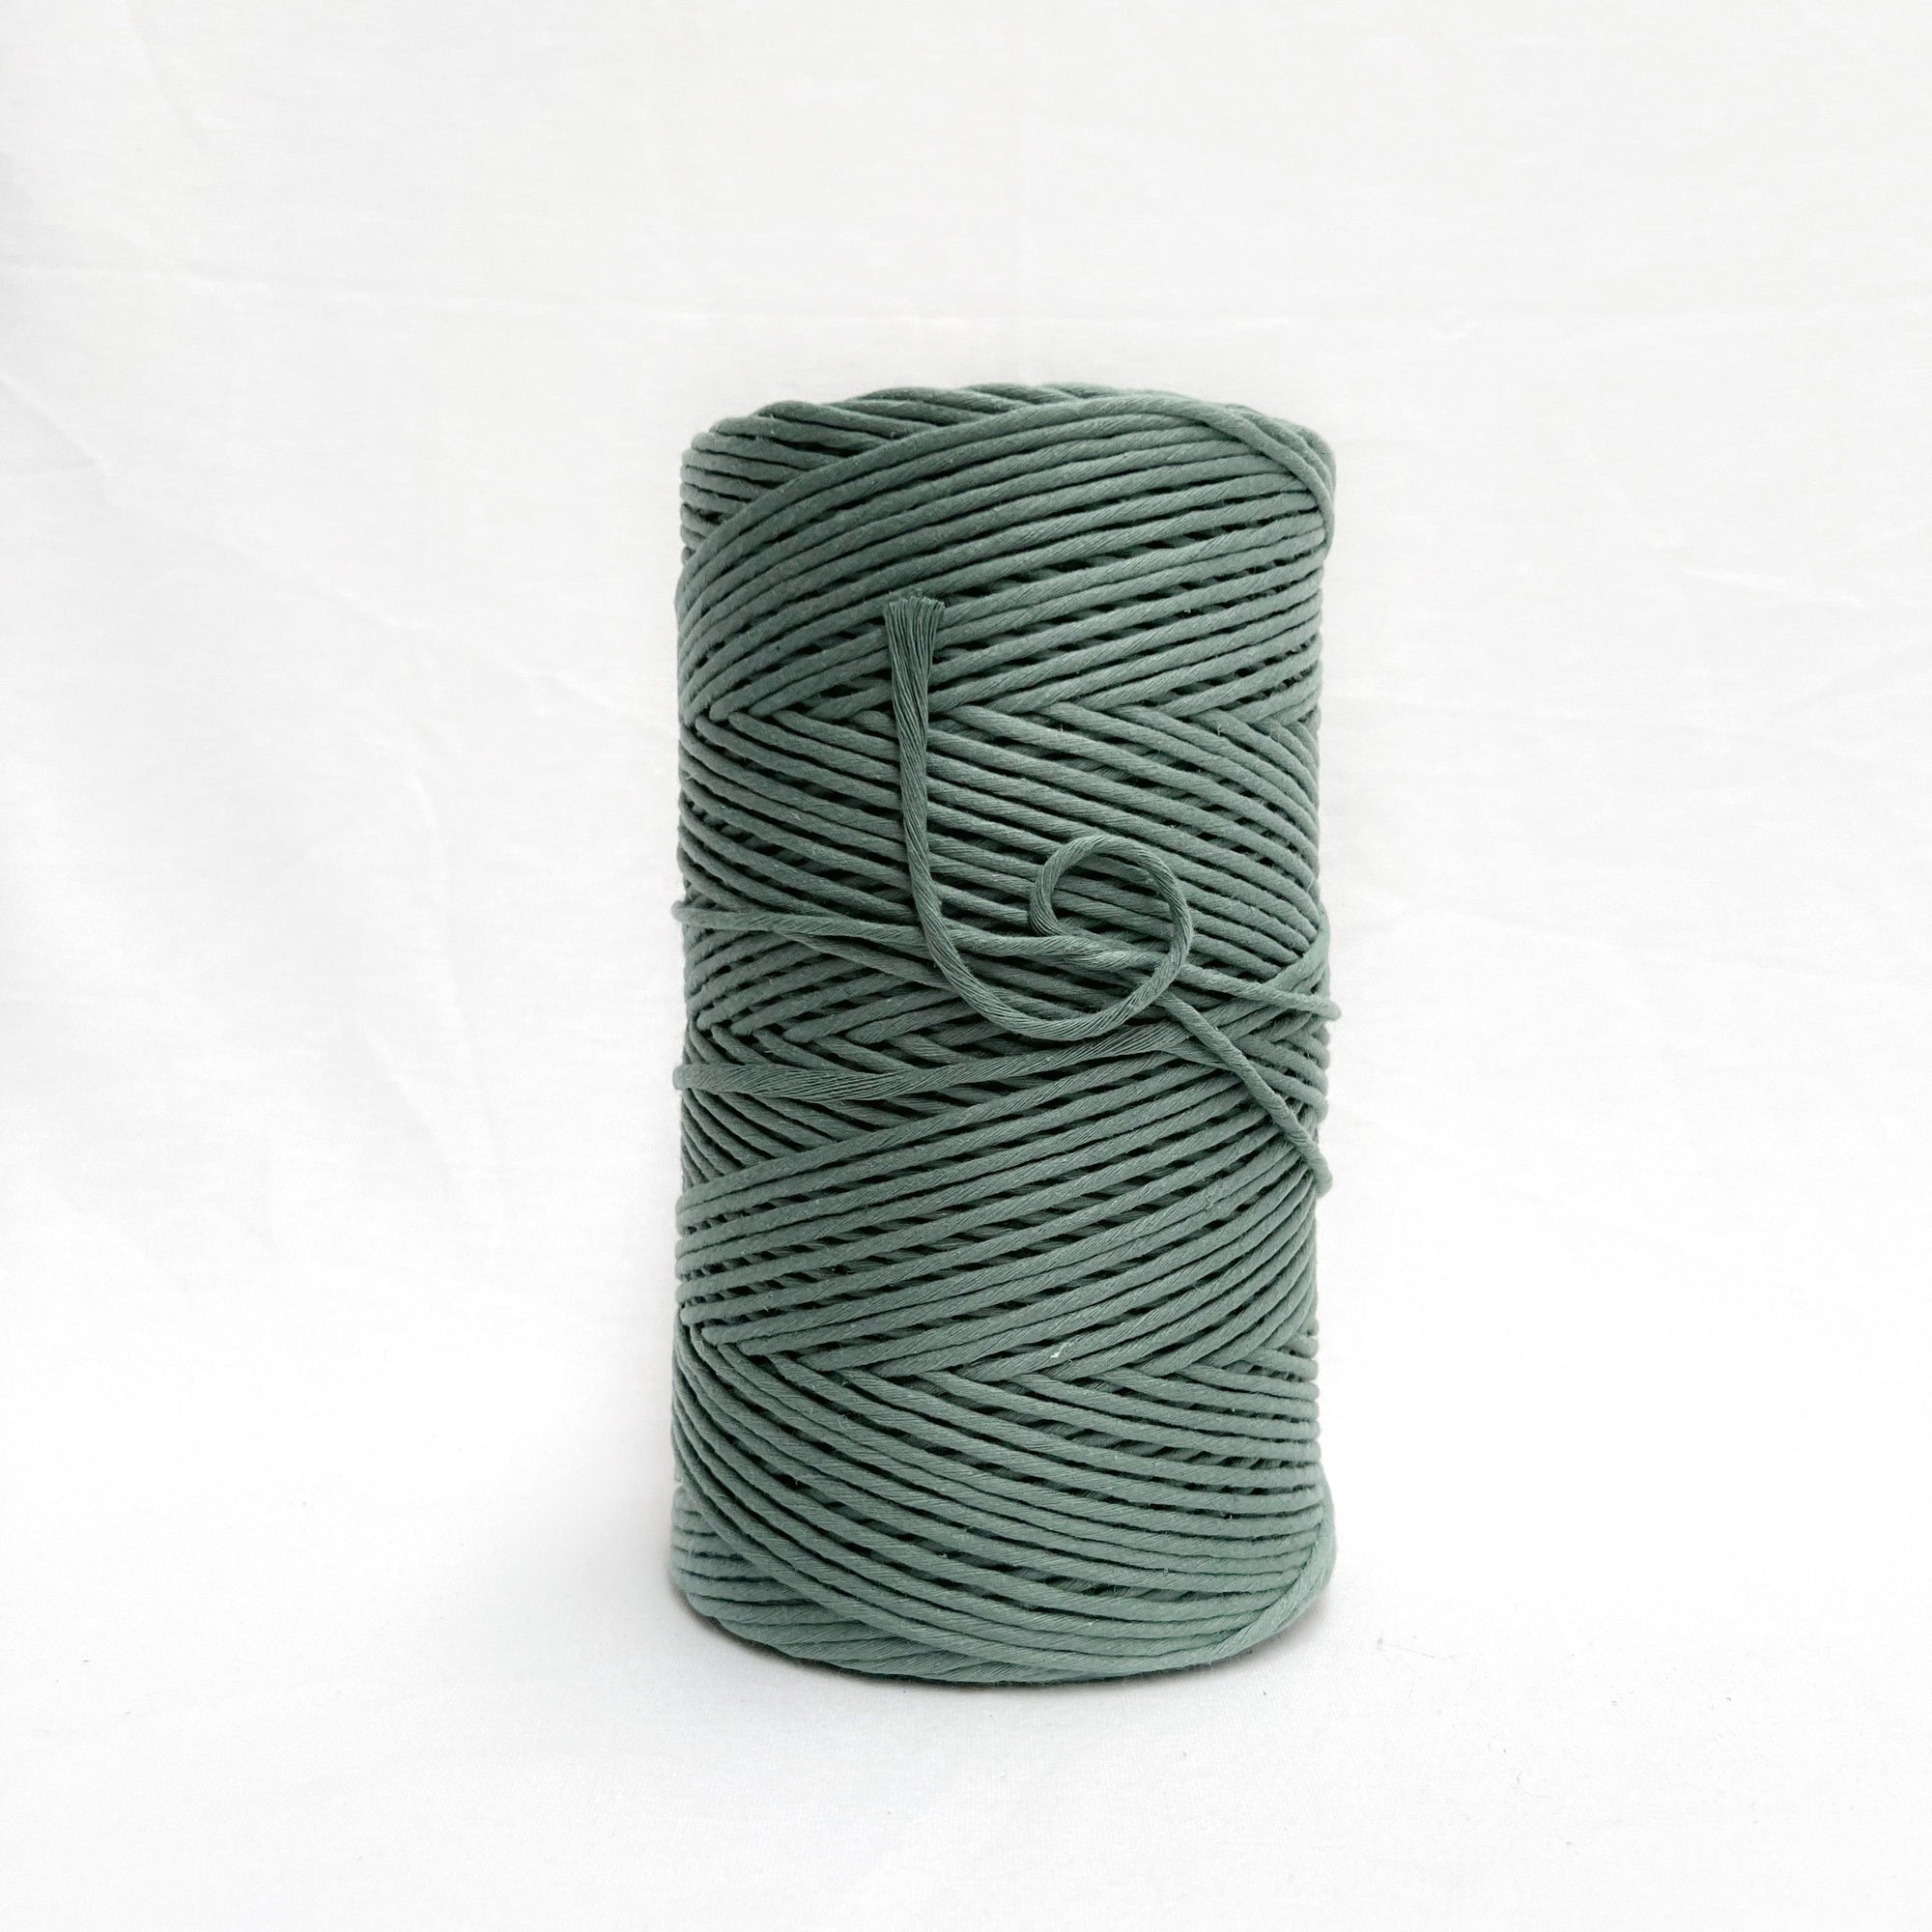 mary maker studio 1kg 5mm recycled cotton macrame string in dusty winter green colour buy online for macrame workshops beginners and advanced artists